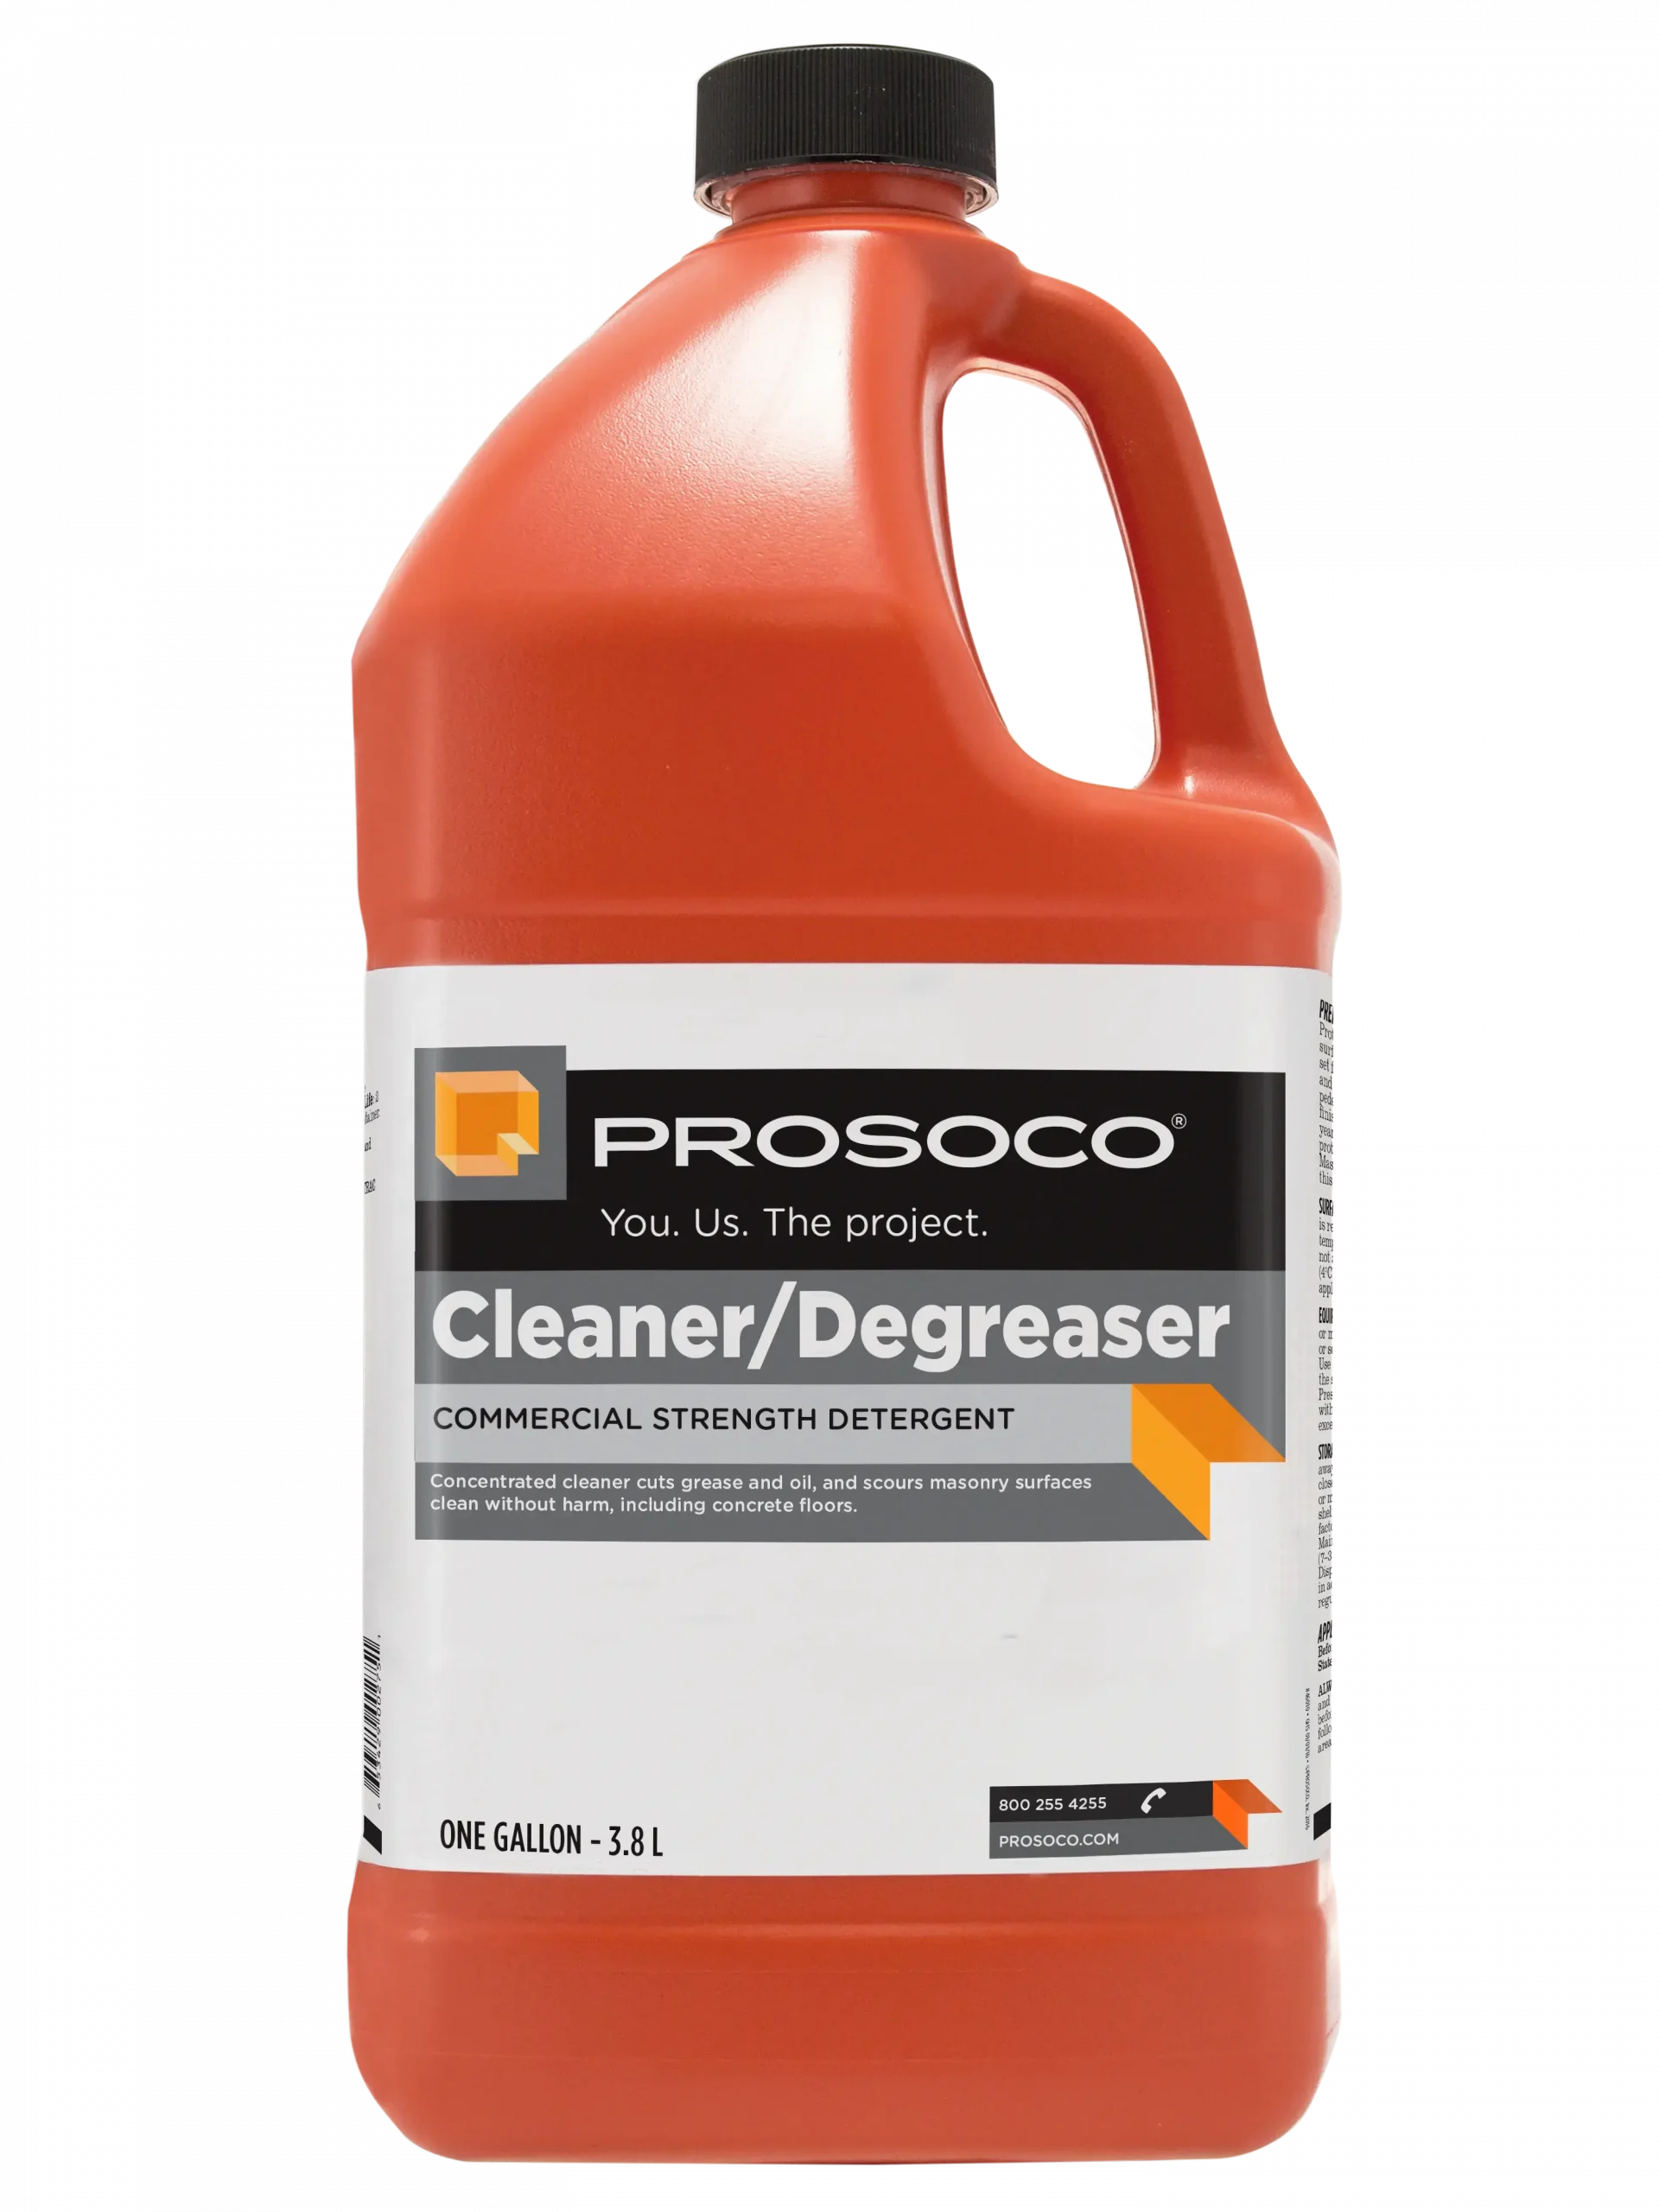 PROSOCO Consolideck Cleaner & Degreaser